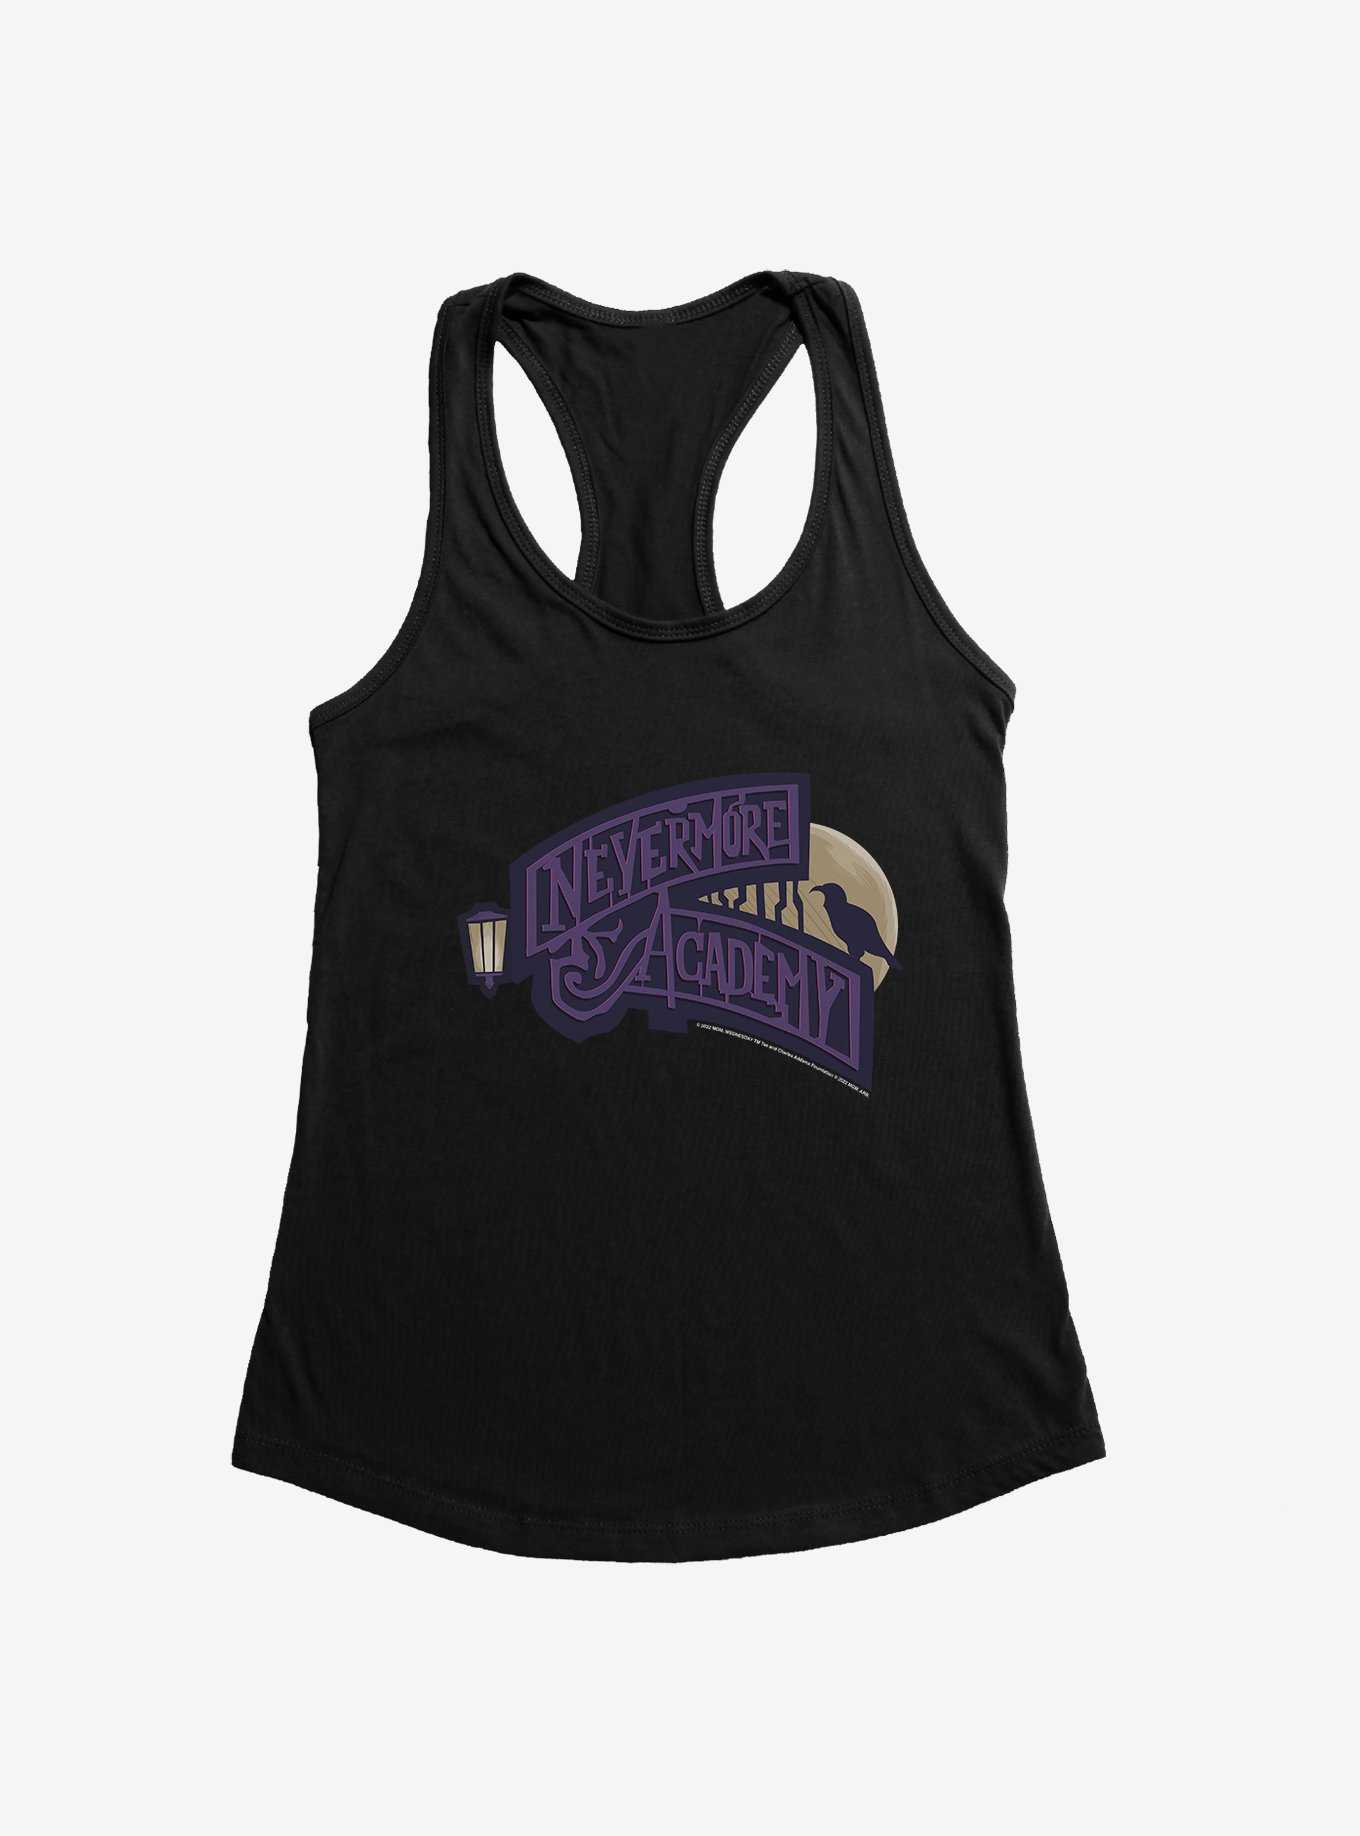 Wednesday Nevermore Academy Womens Tank Top, , hi-res